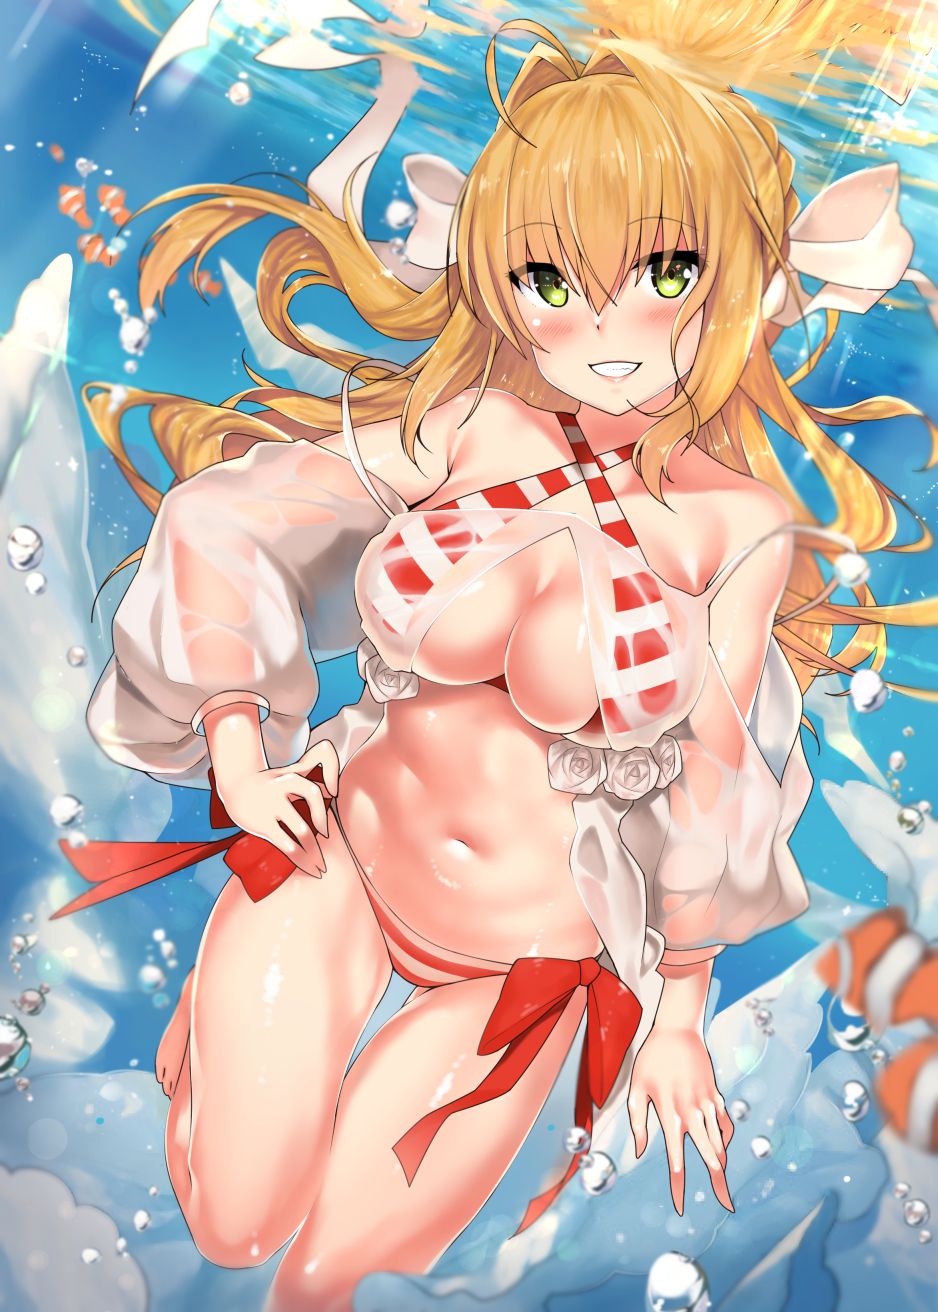 [Secondary erotic] Assorted erotic images of FGO appearance servants are here [49 sheets] 44